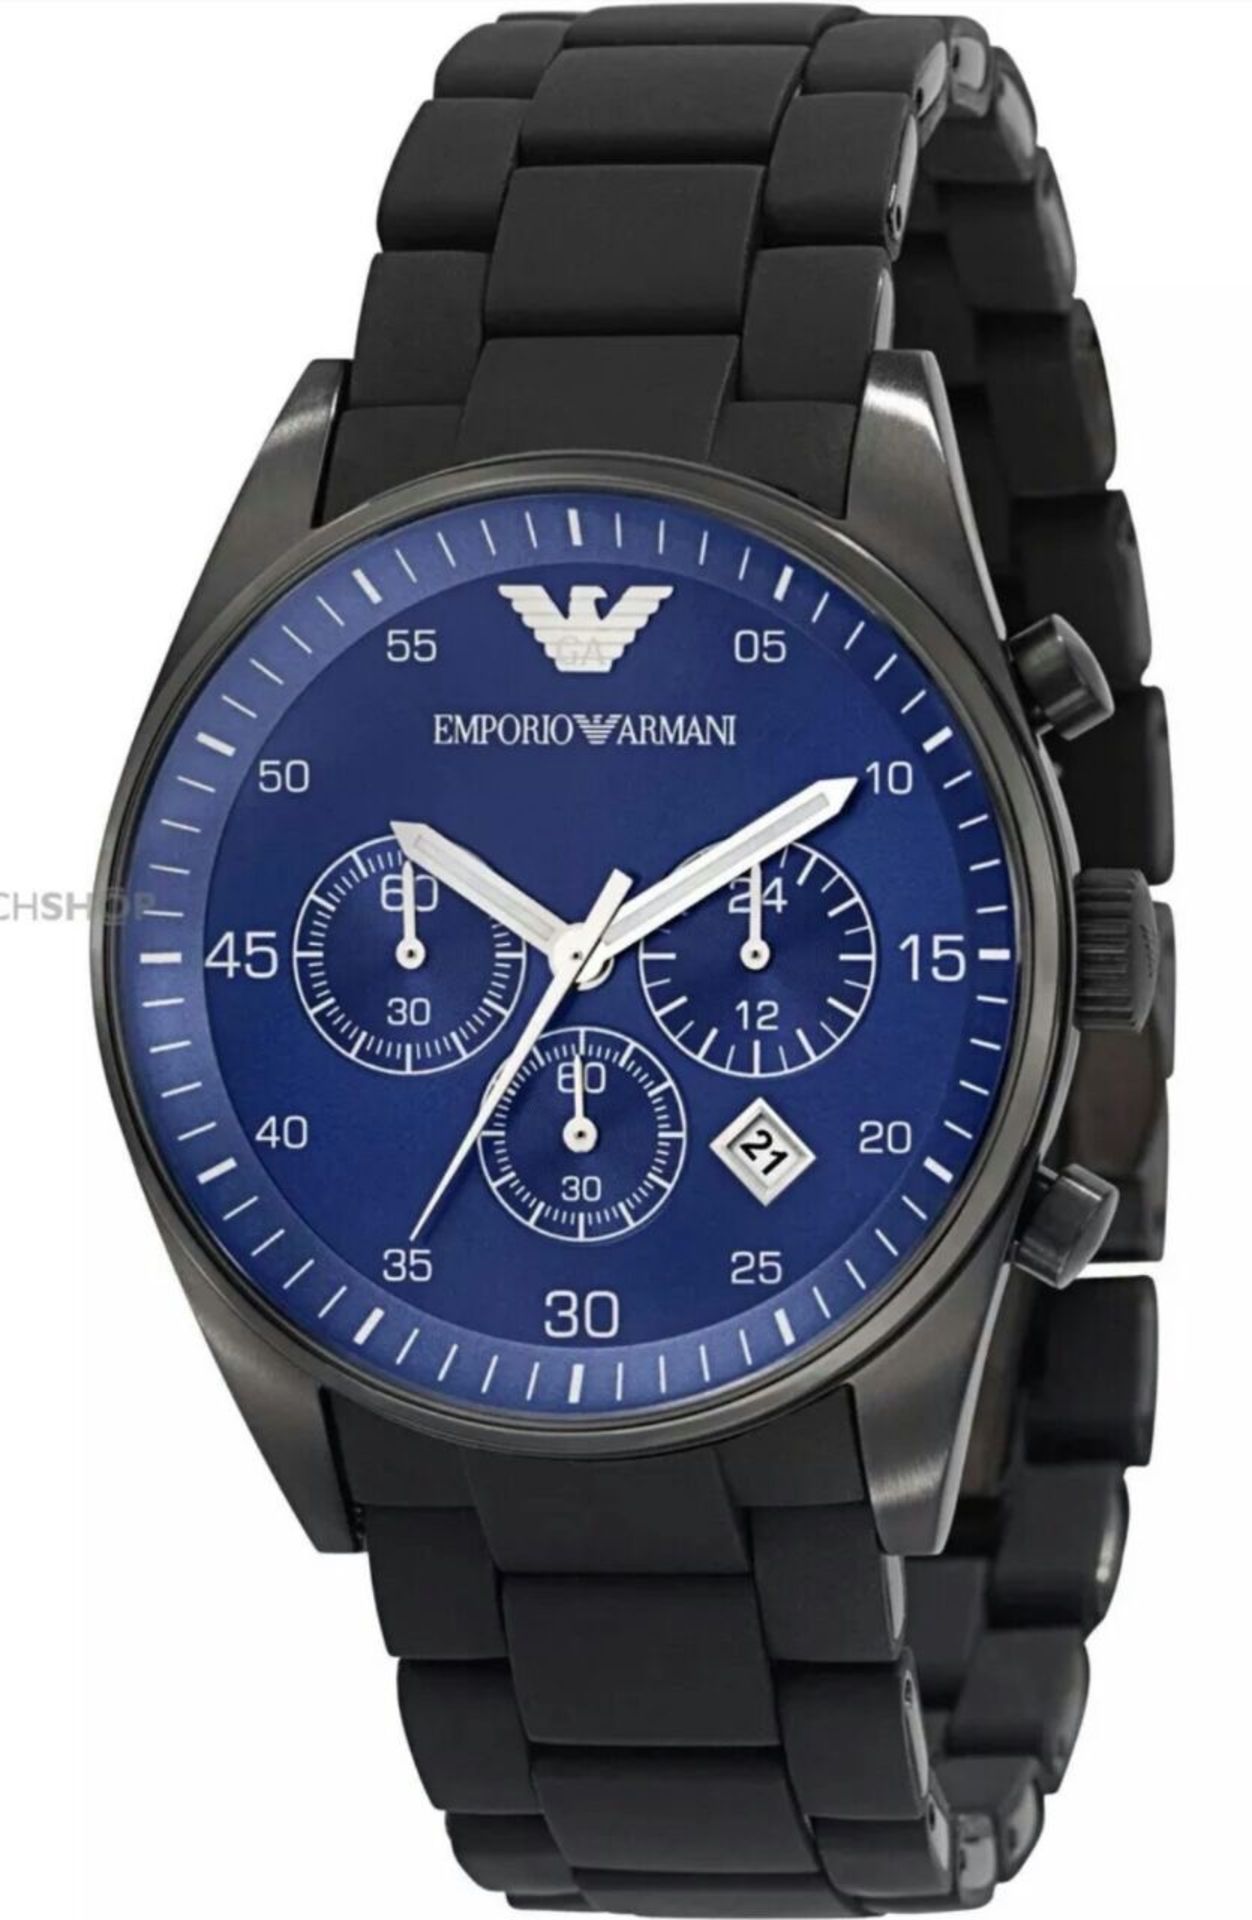 10 X BRAND NEW EMPORIO ARMANI DESIGNER WATCHES, COMPLETE WITH ORIGINAL ARMANI WATCH BOXES, MANUALS - Image 9 of 11